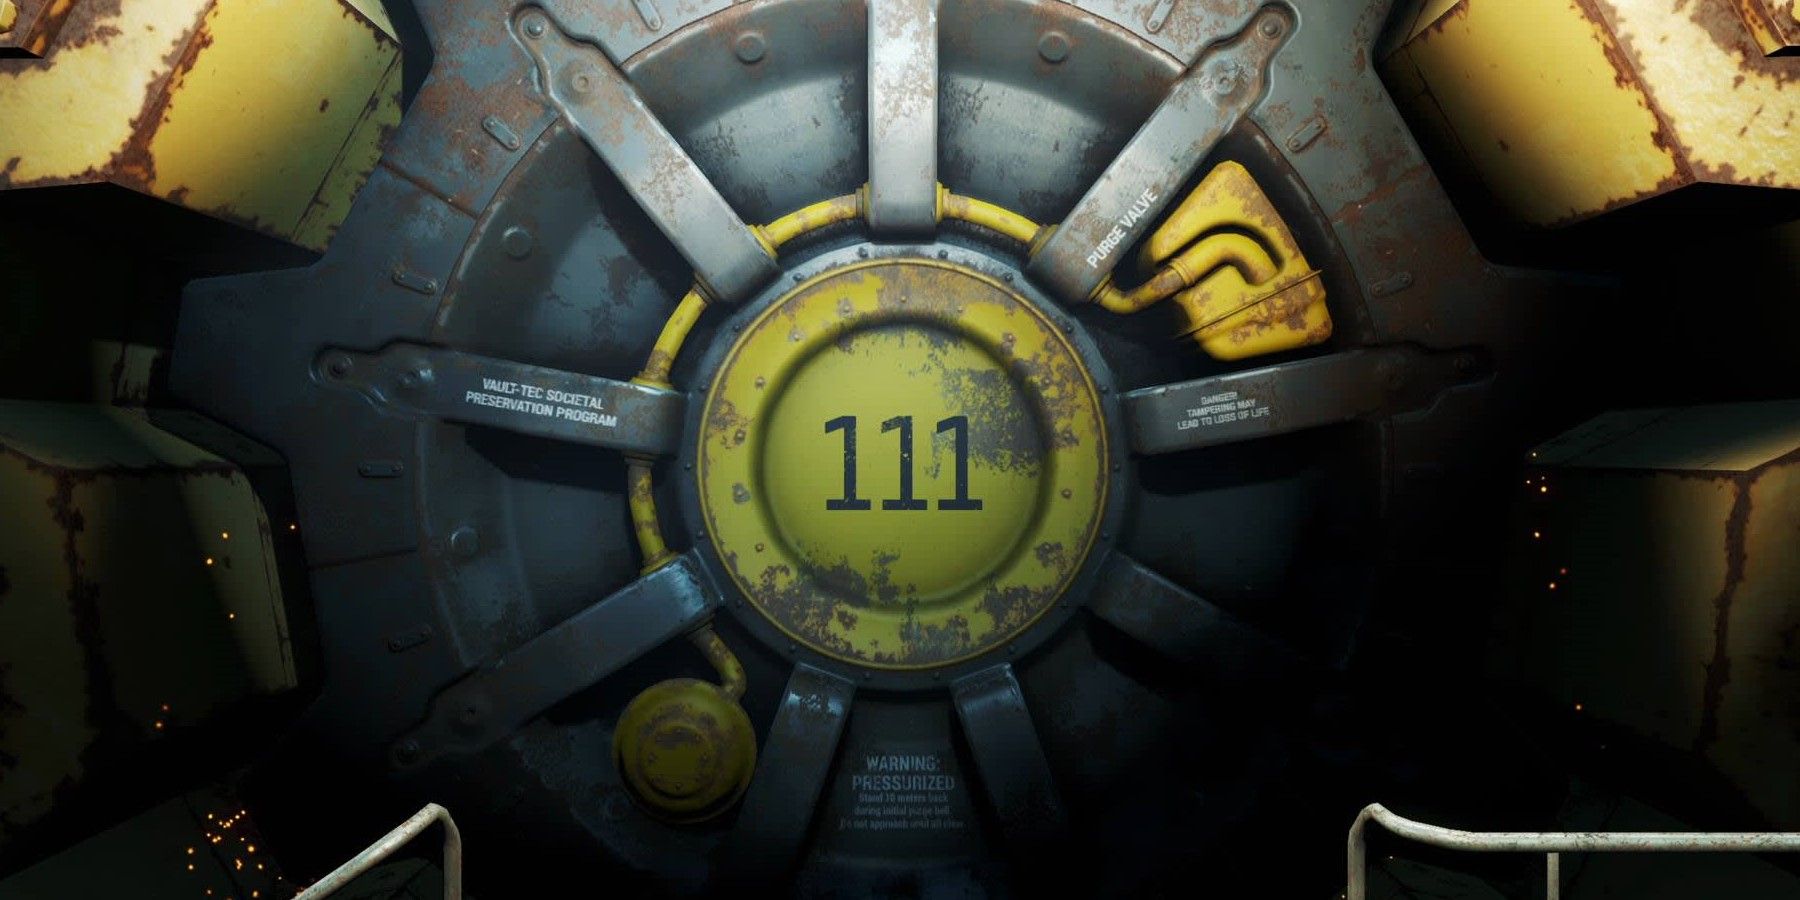 fallout 4 tips and tricks featured - door to vault 111